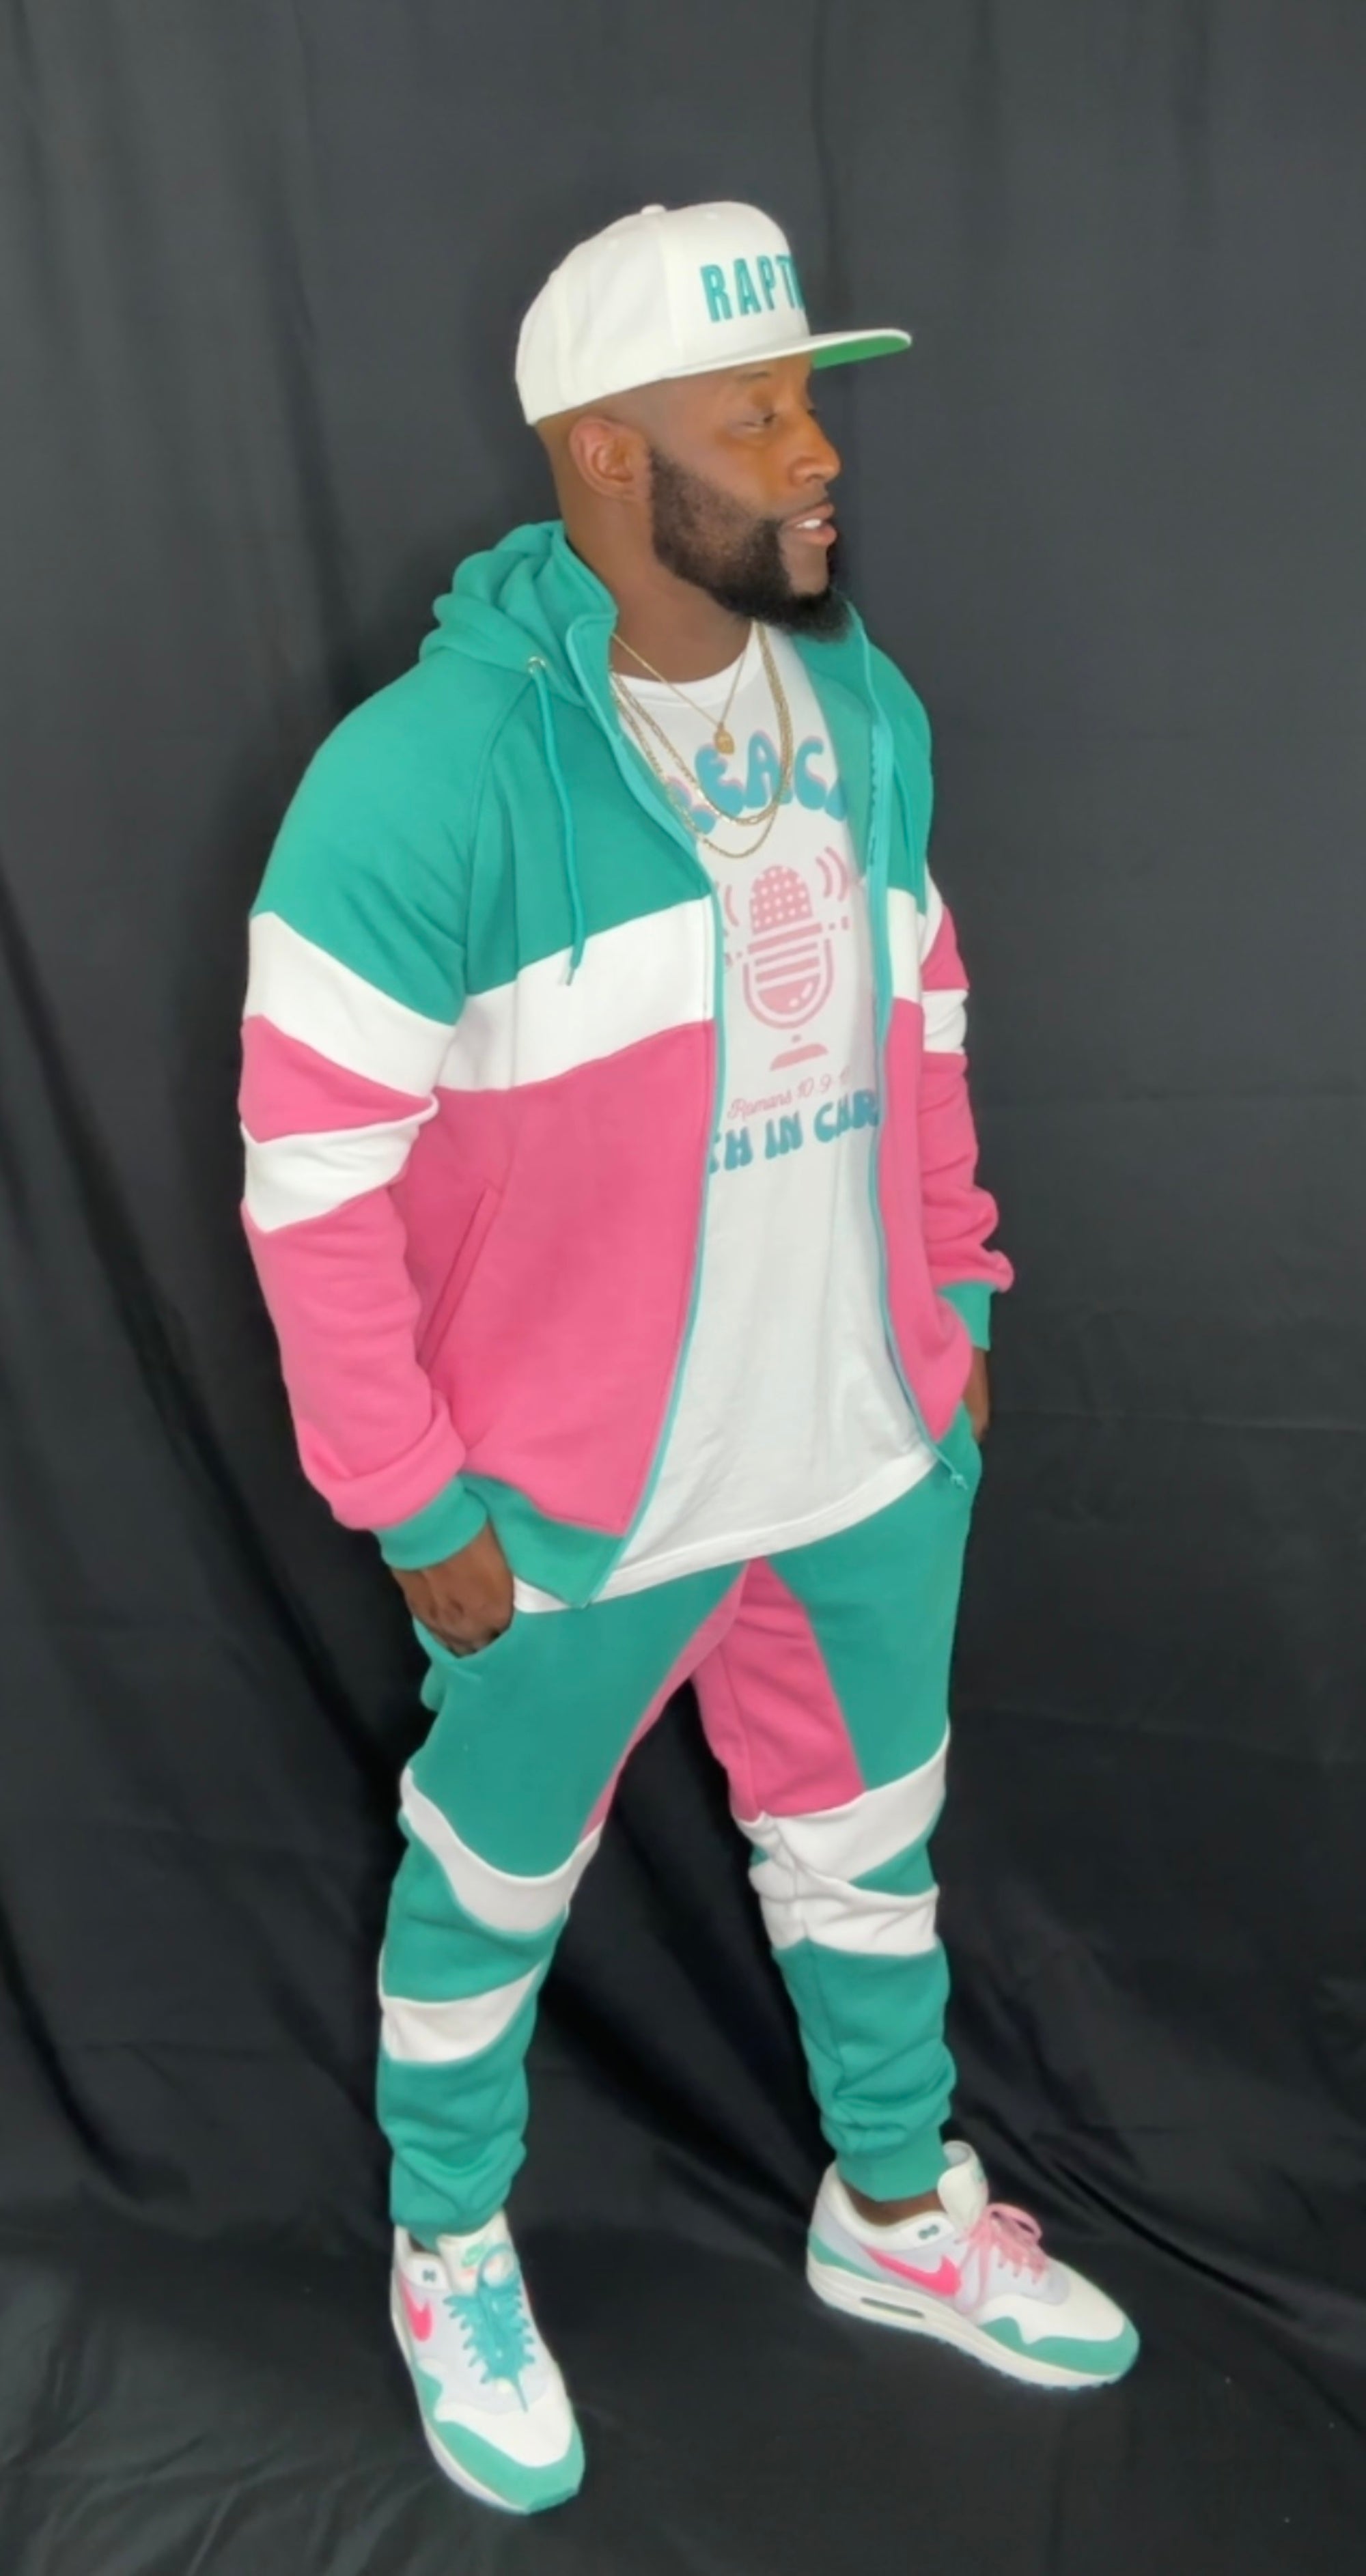 Preach Tracksuit Teal/White/Pink 100% Cotton Fleece